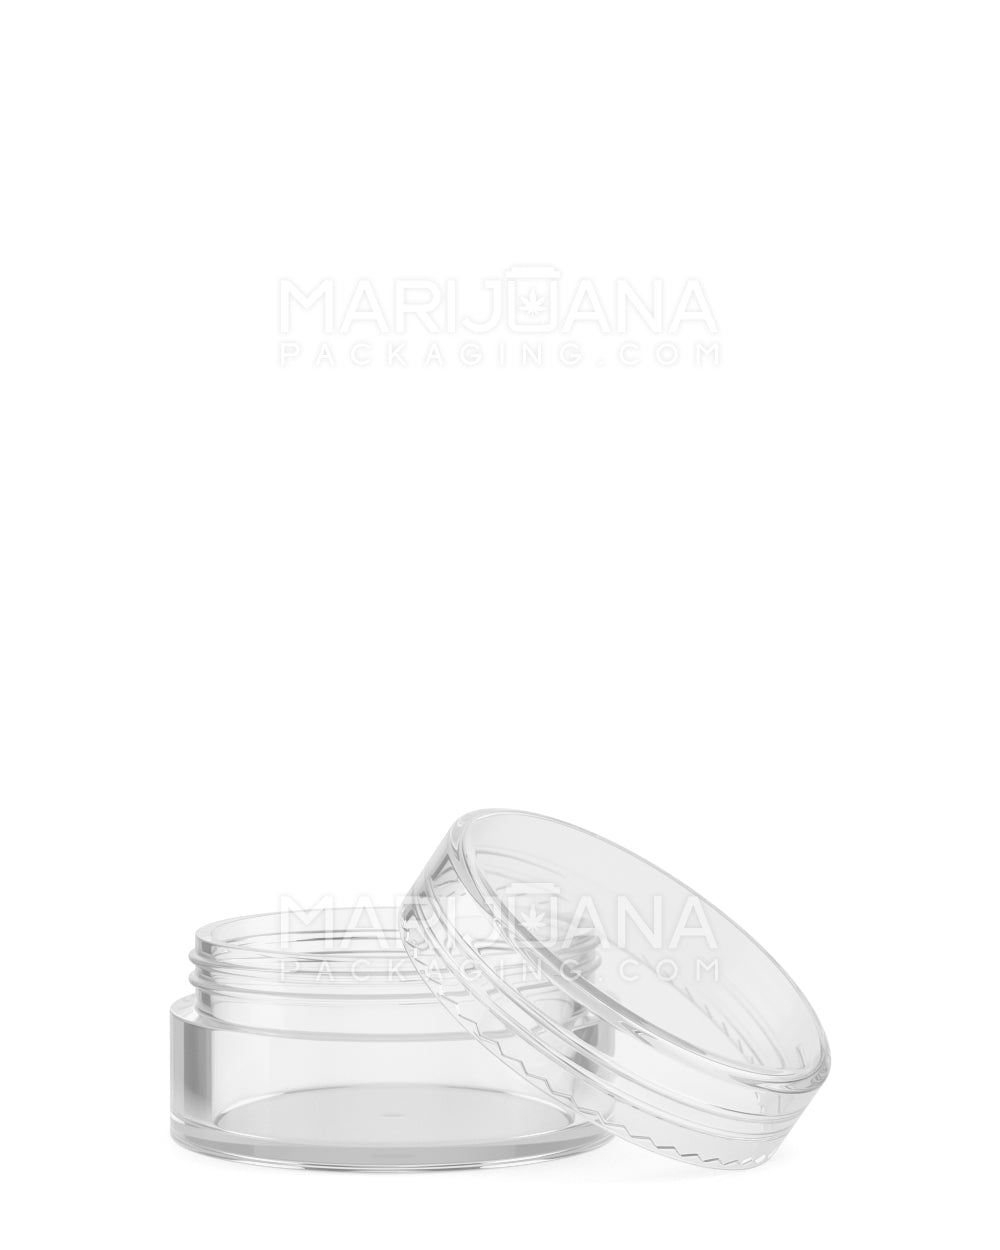 Clear Concentrate Containers w/ Screw Top Cap | 10mL - Plastic | Sample - 1